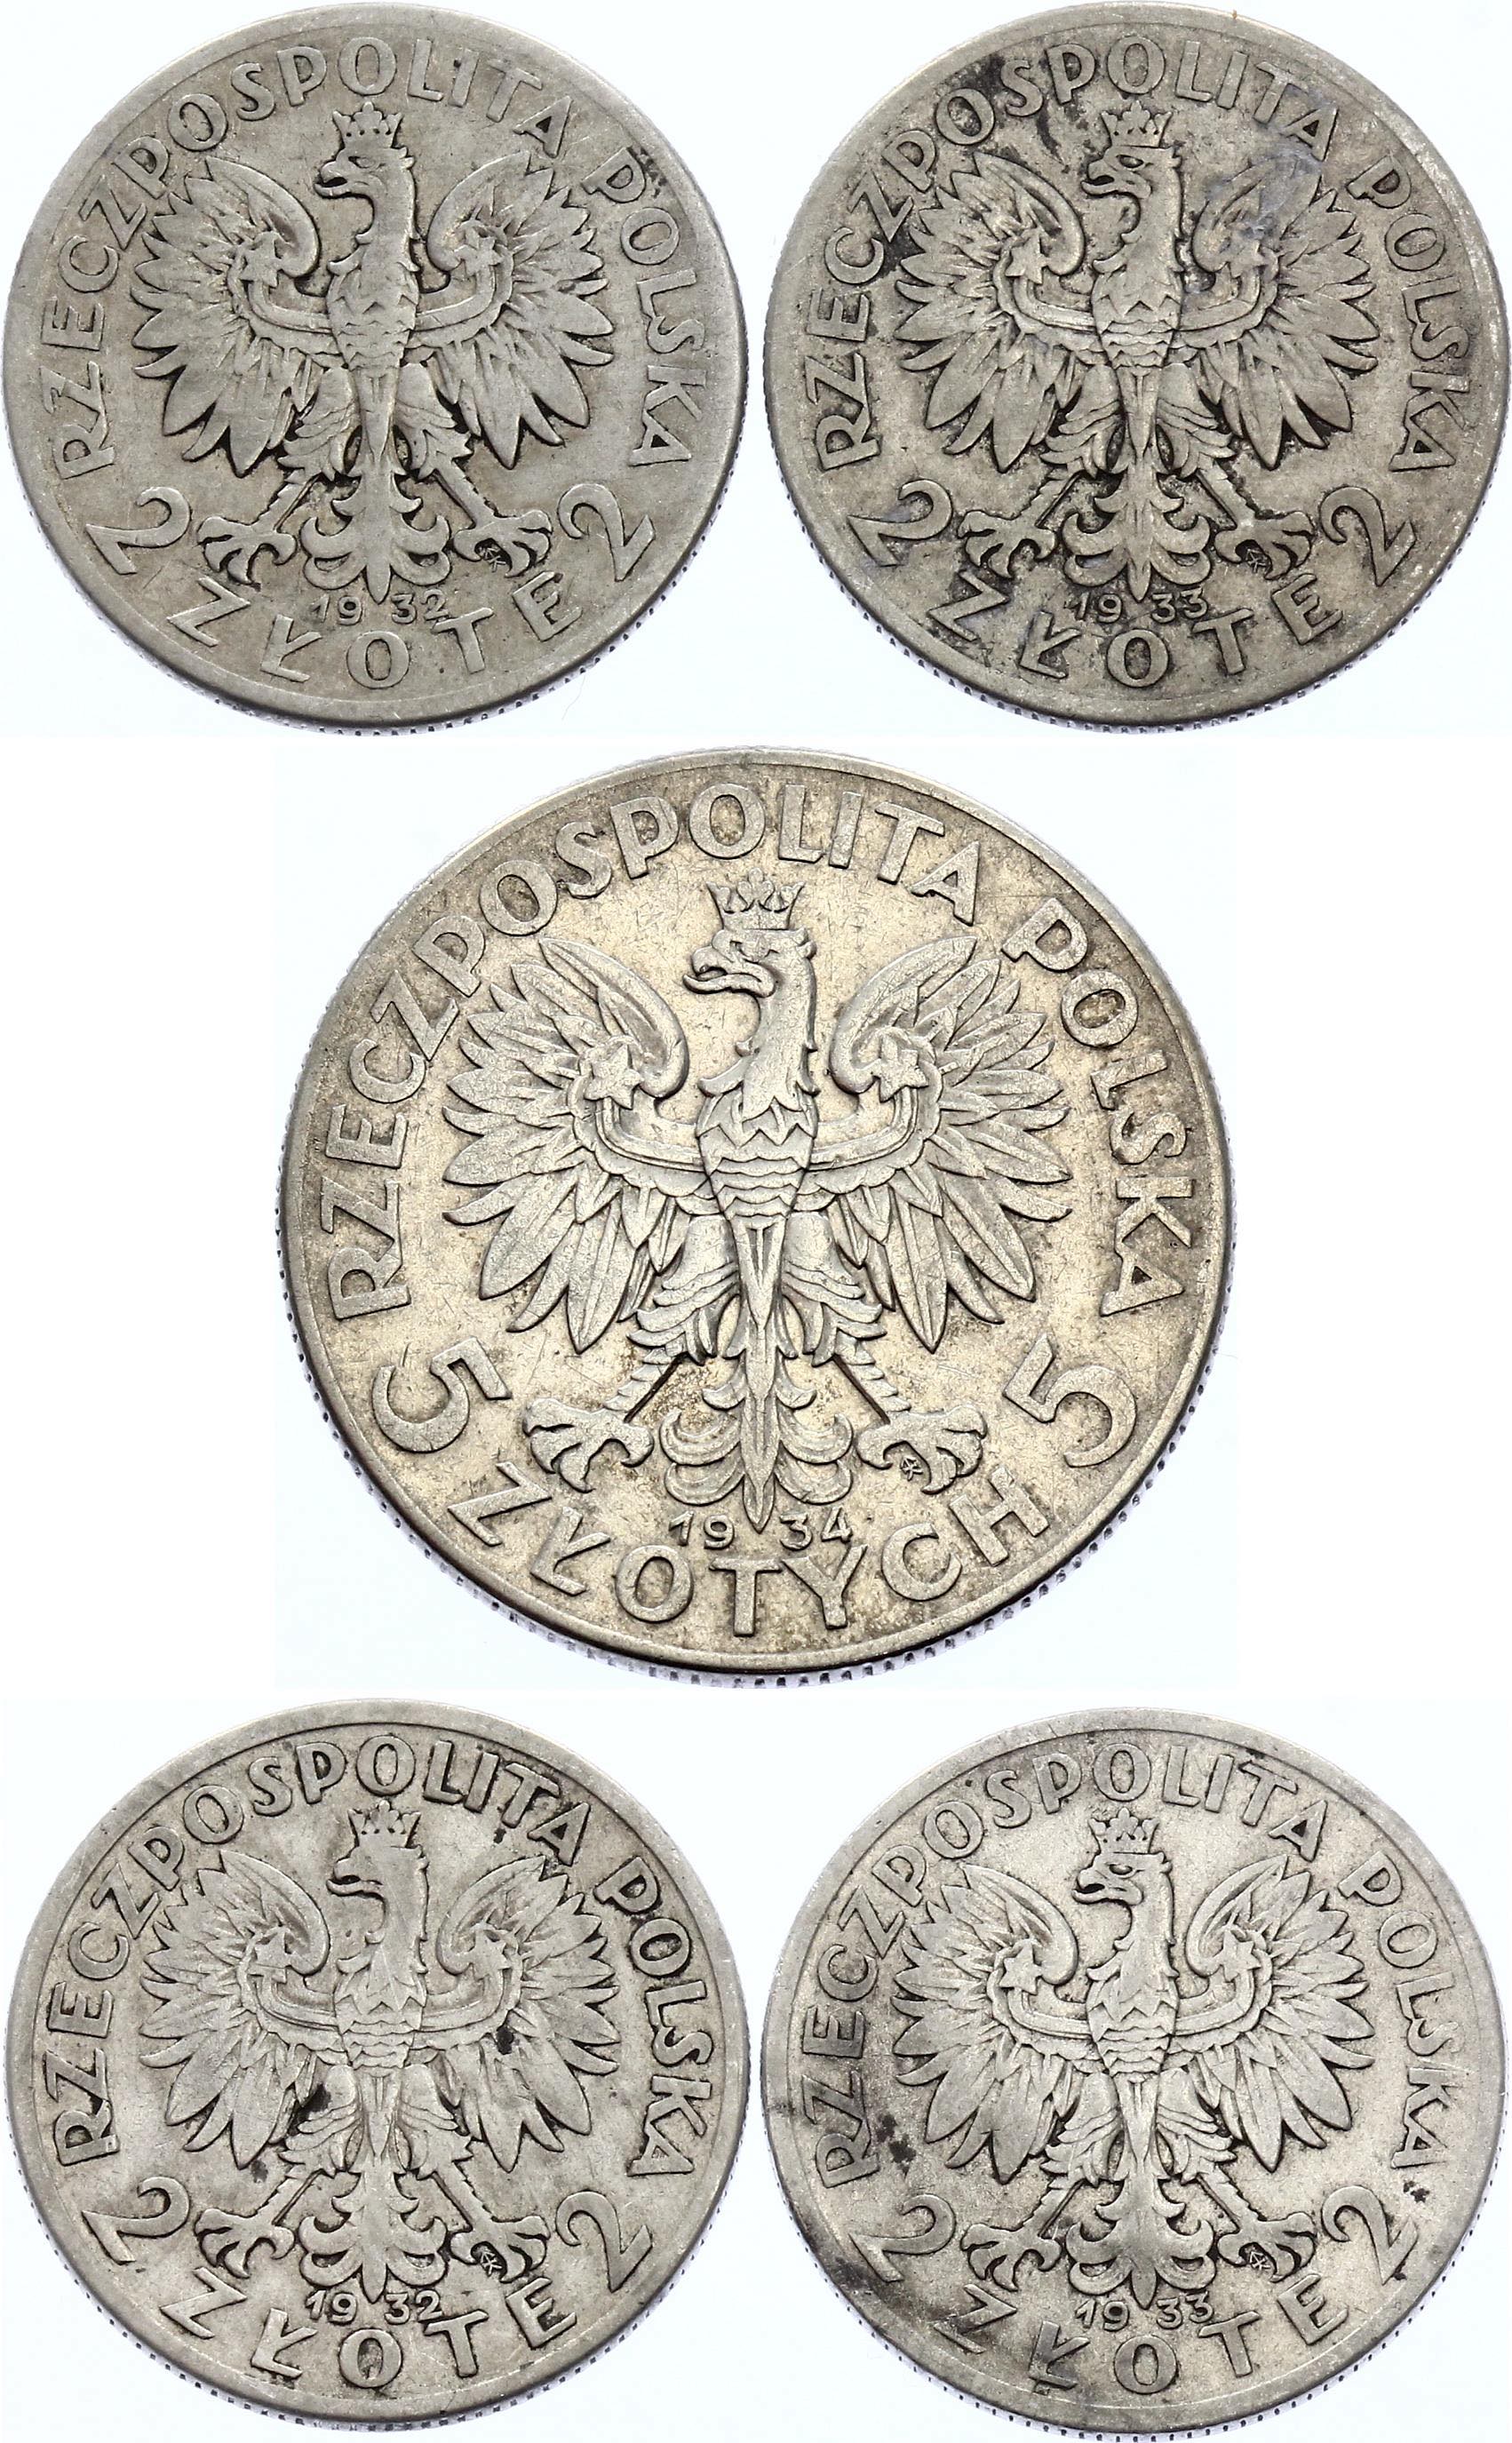 Poland Lot of 5 Coins 1932 - 1934